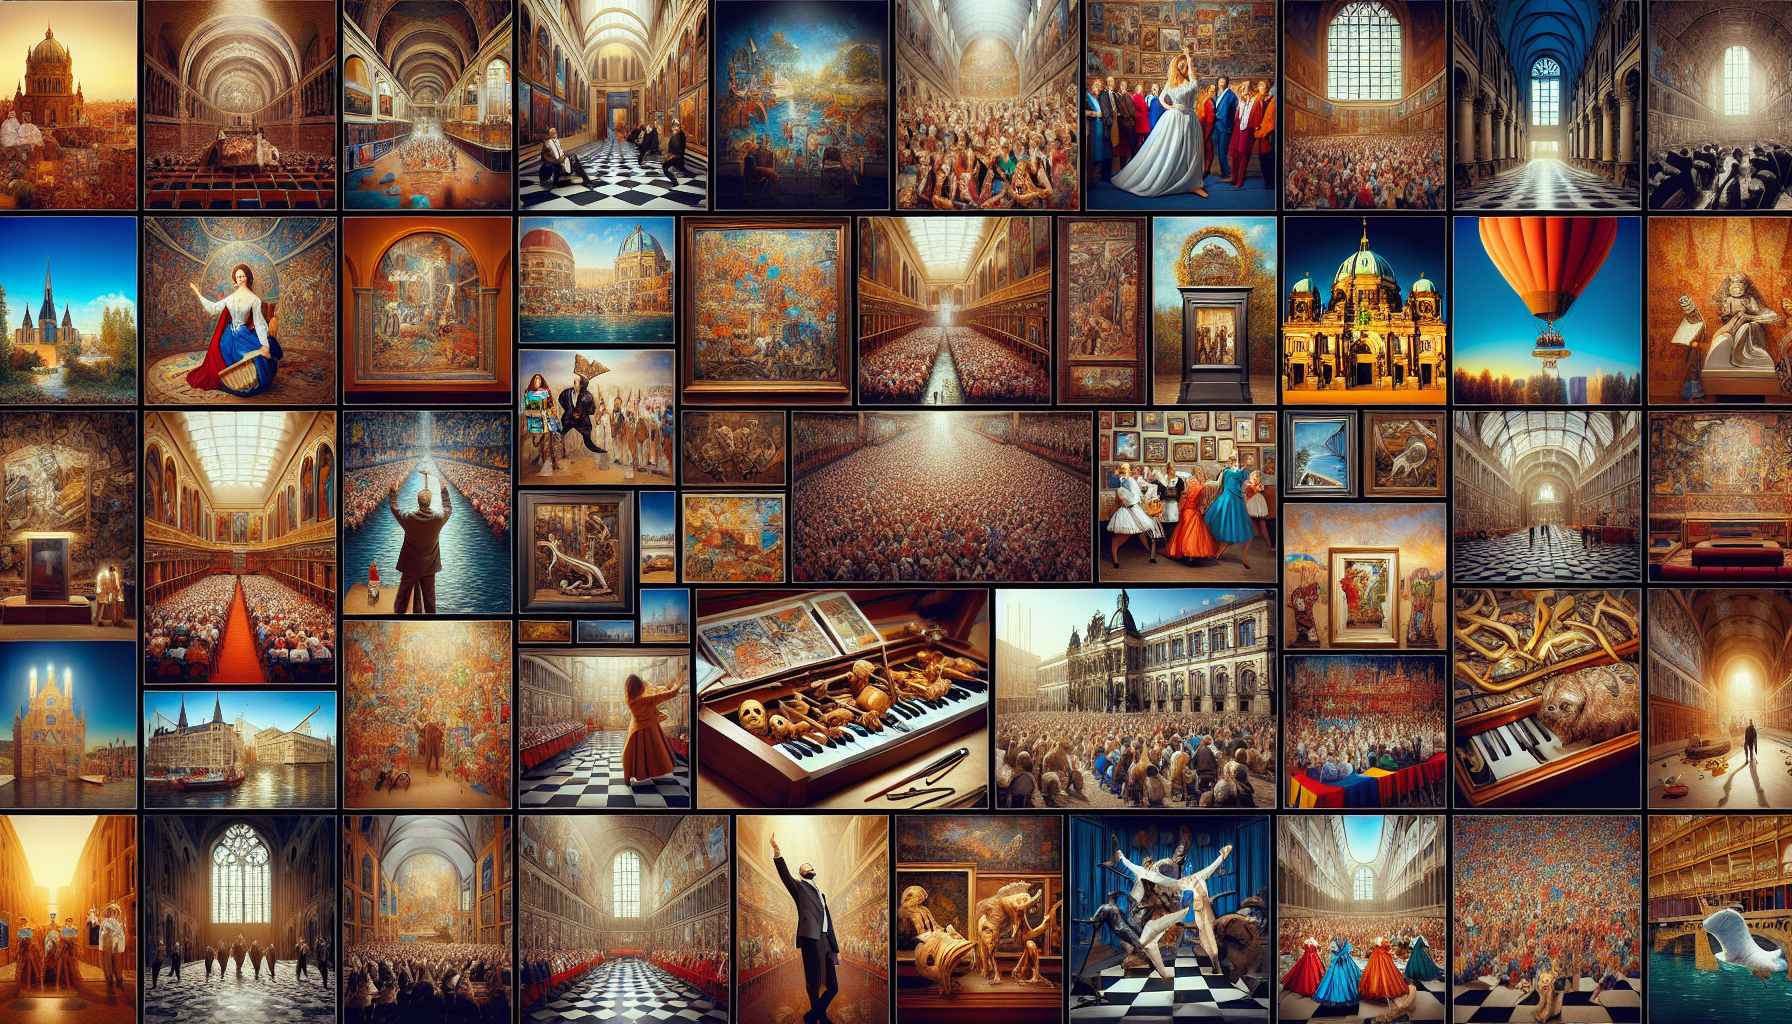 explore the significance of european museums, galleries, and performances in shaping art and culture. discover what distinguishes them and their lasting impact.